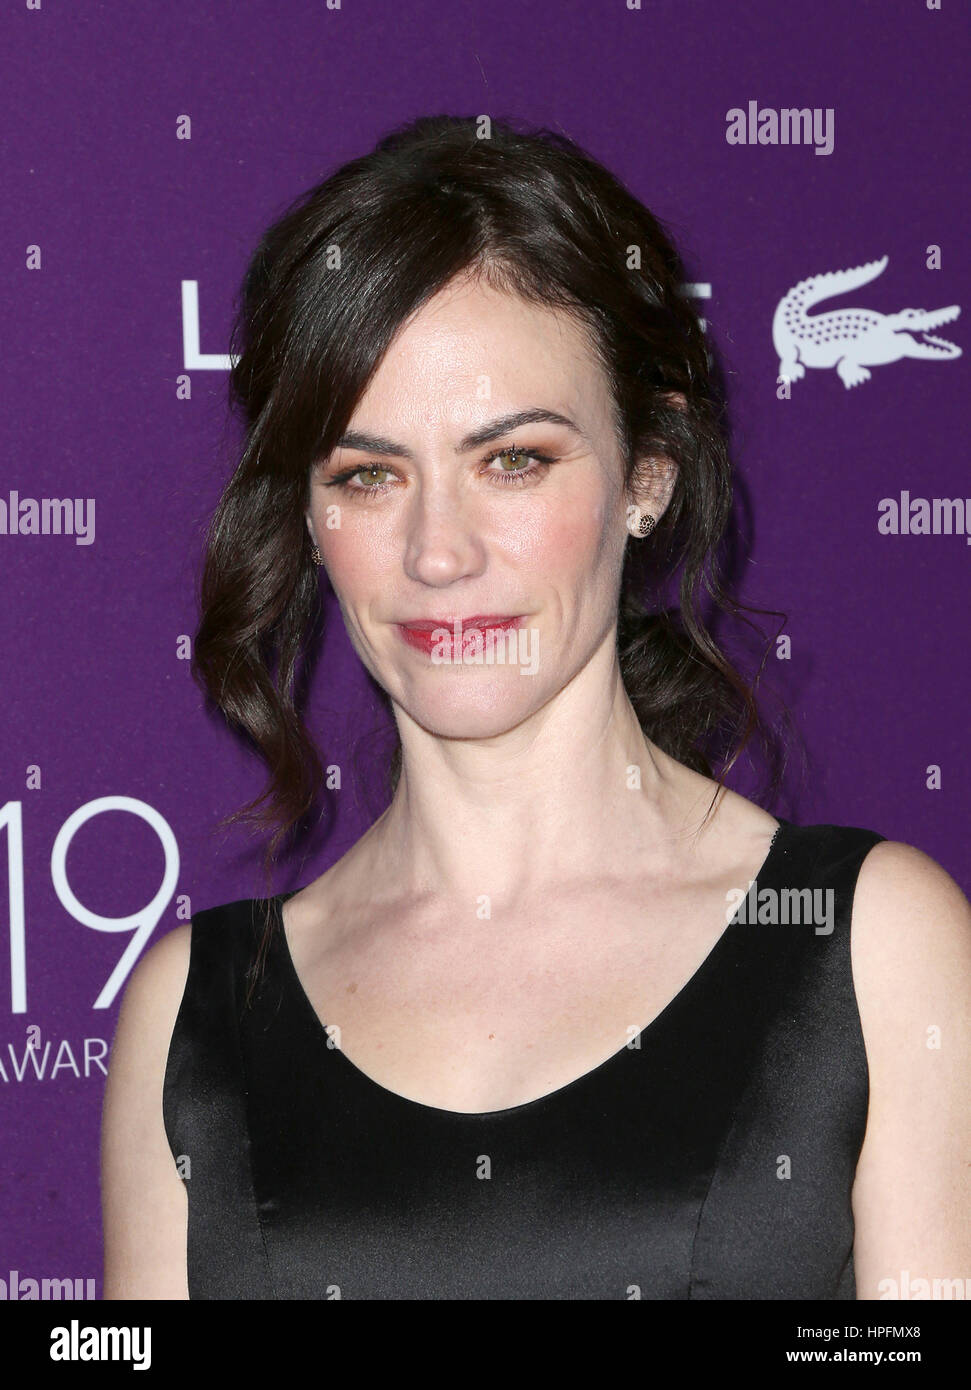 Beverly Hills, CA. 21st Feb, 2017. Maggie Siff, At 19th CDGA (Costume Designers Guild Awards), At The Beverly Hilton Hotel In California on February 21, 2017. Credit: Faye Sadou/Media Punch/Alamy Live News Credit: MediaPunch Inc/Alamy Live News Stock Photo